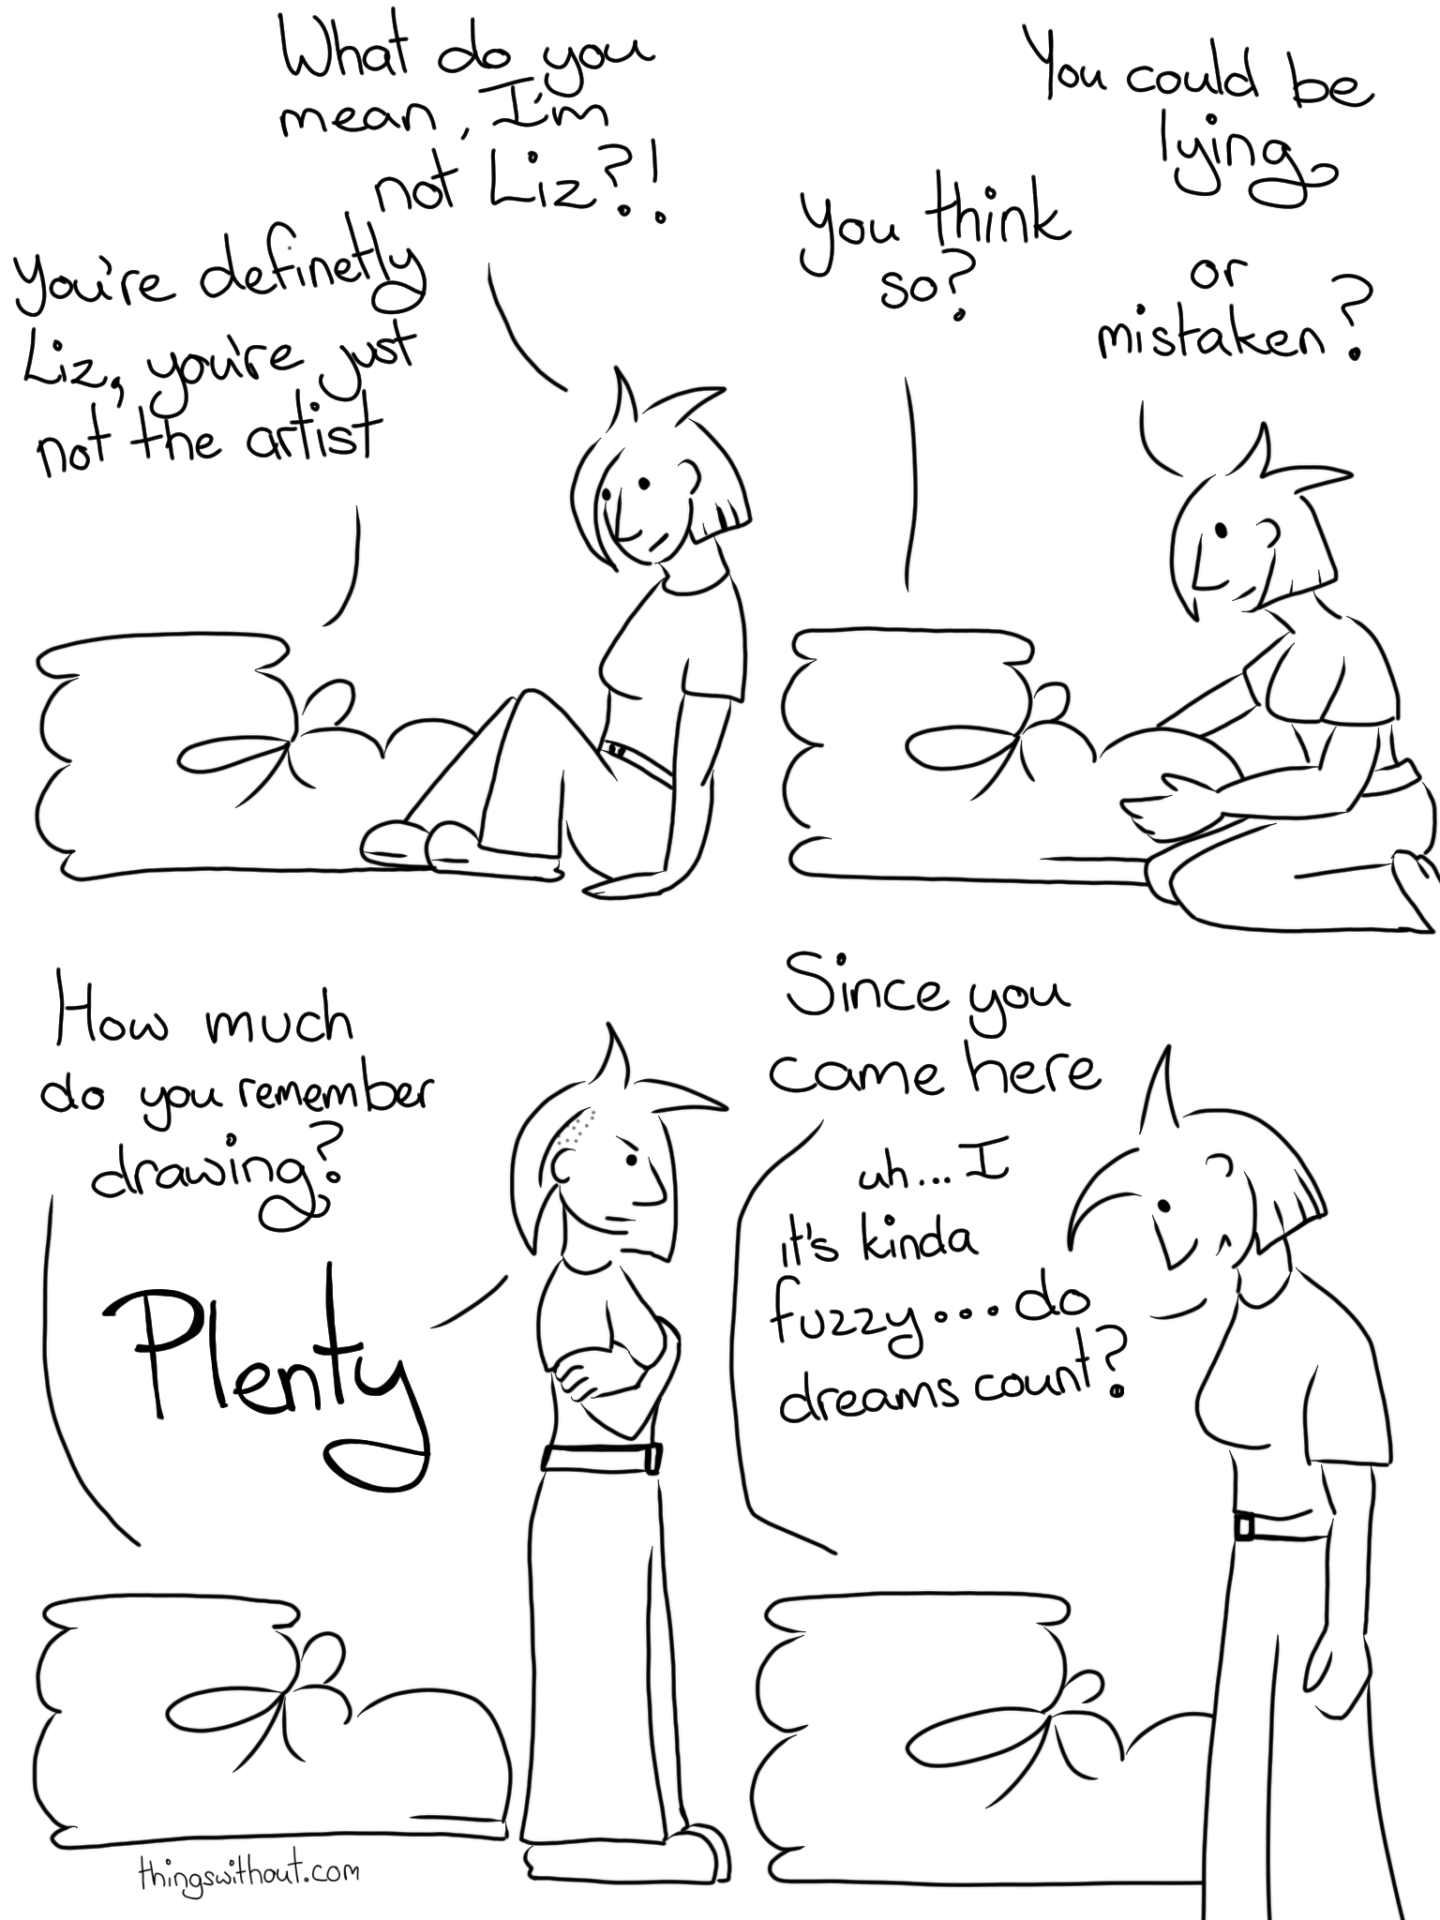 This is a webcomic, there is a transcript below.